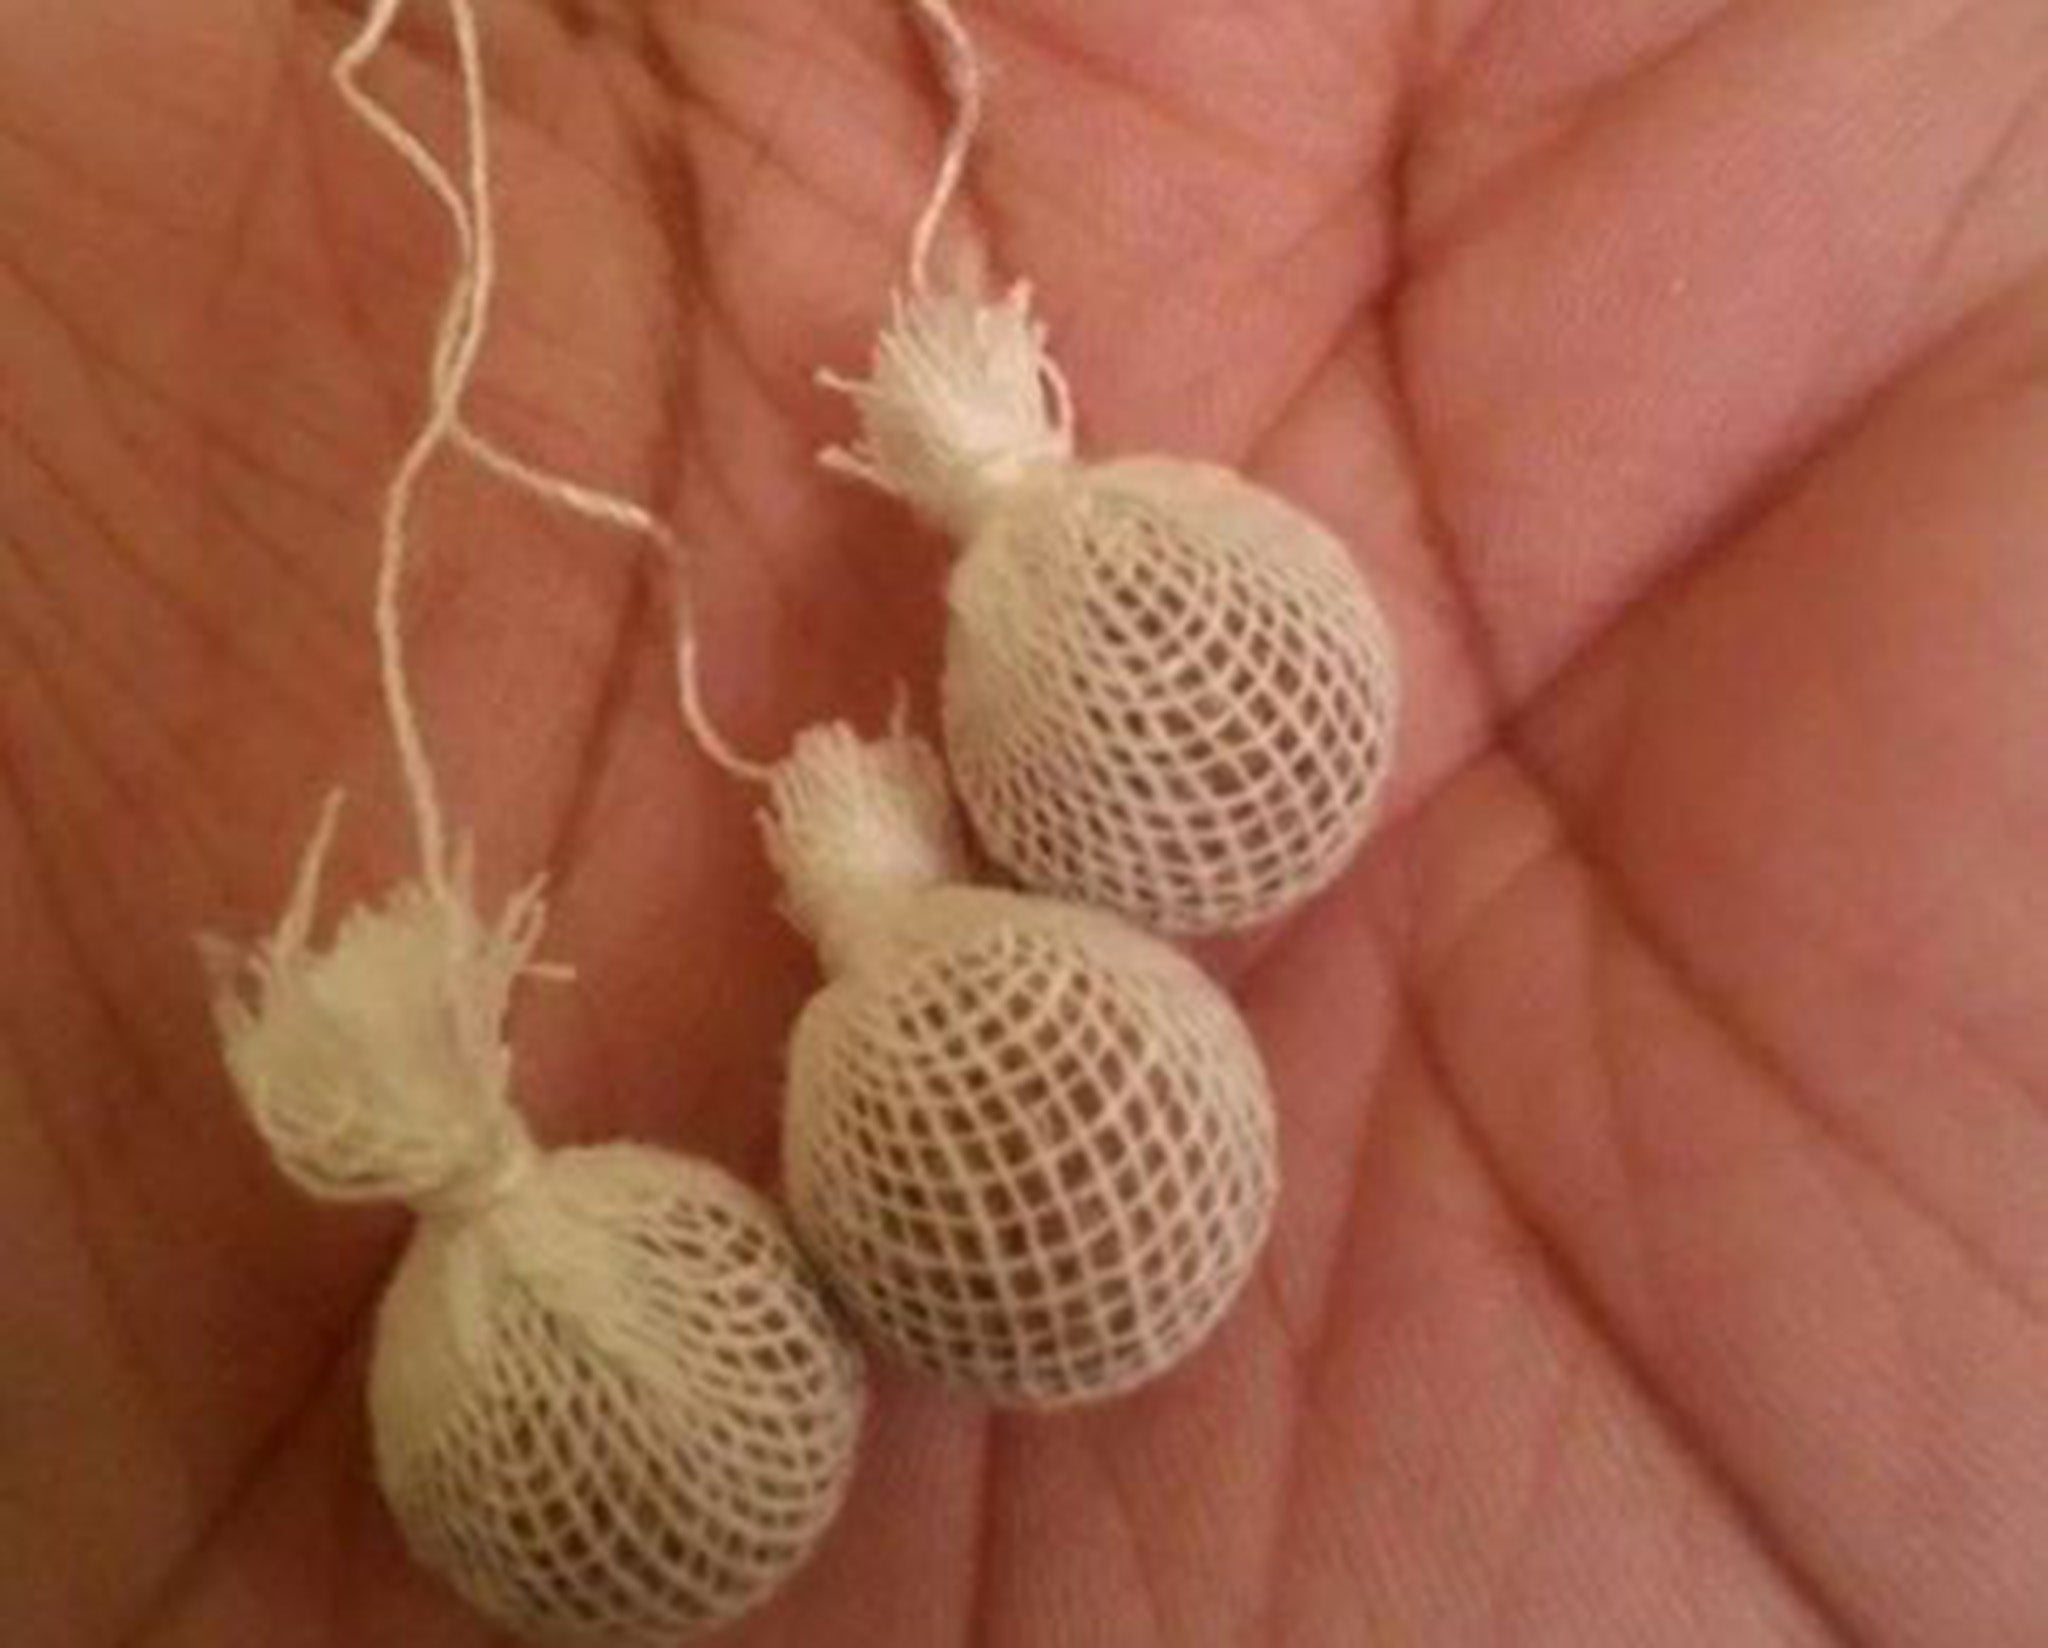 Water Fall Lacking Vagina Porn - Women putting herb balls in vagina to 'detox their wombs' have ...